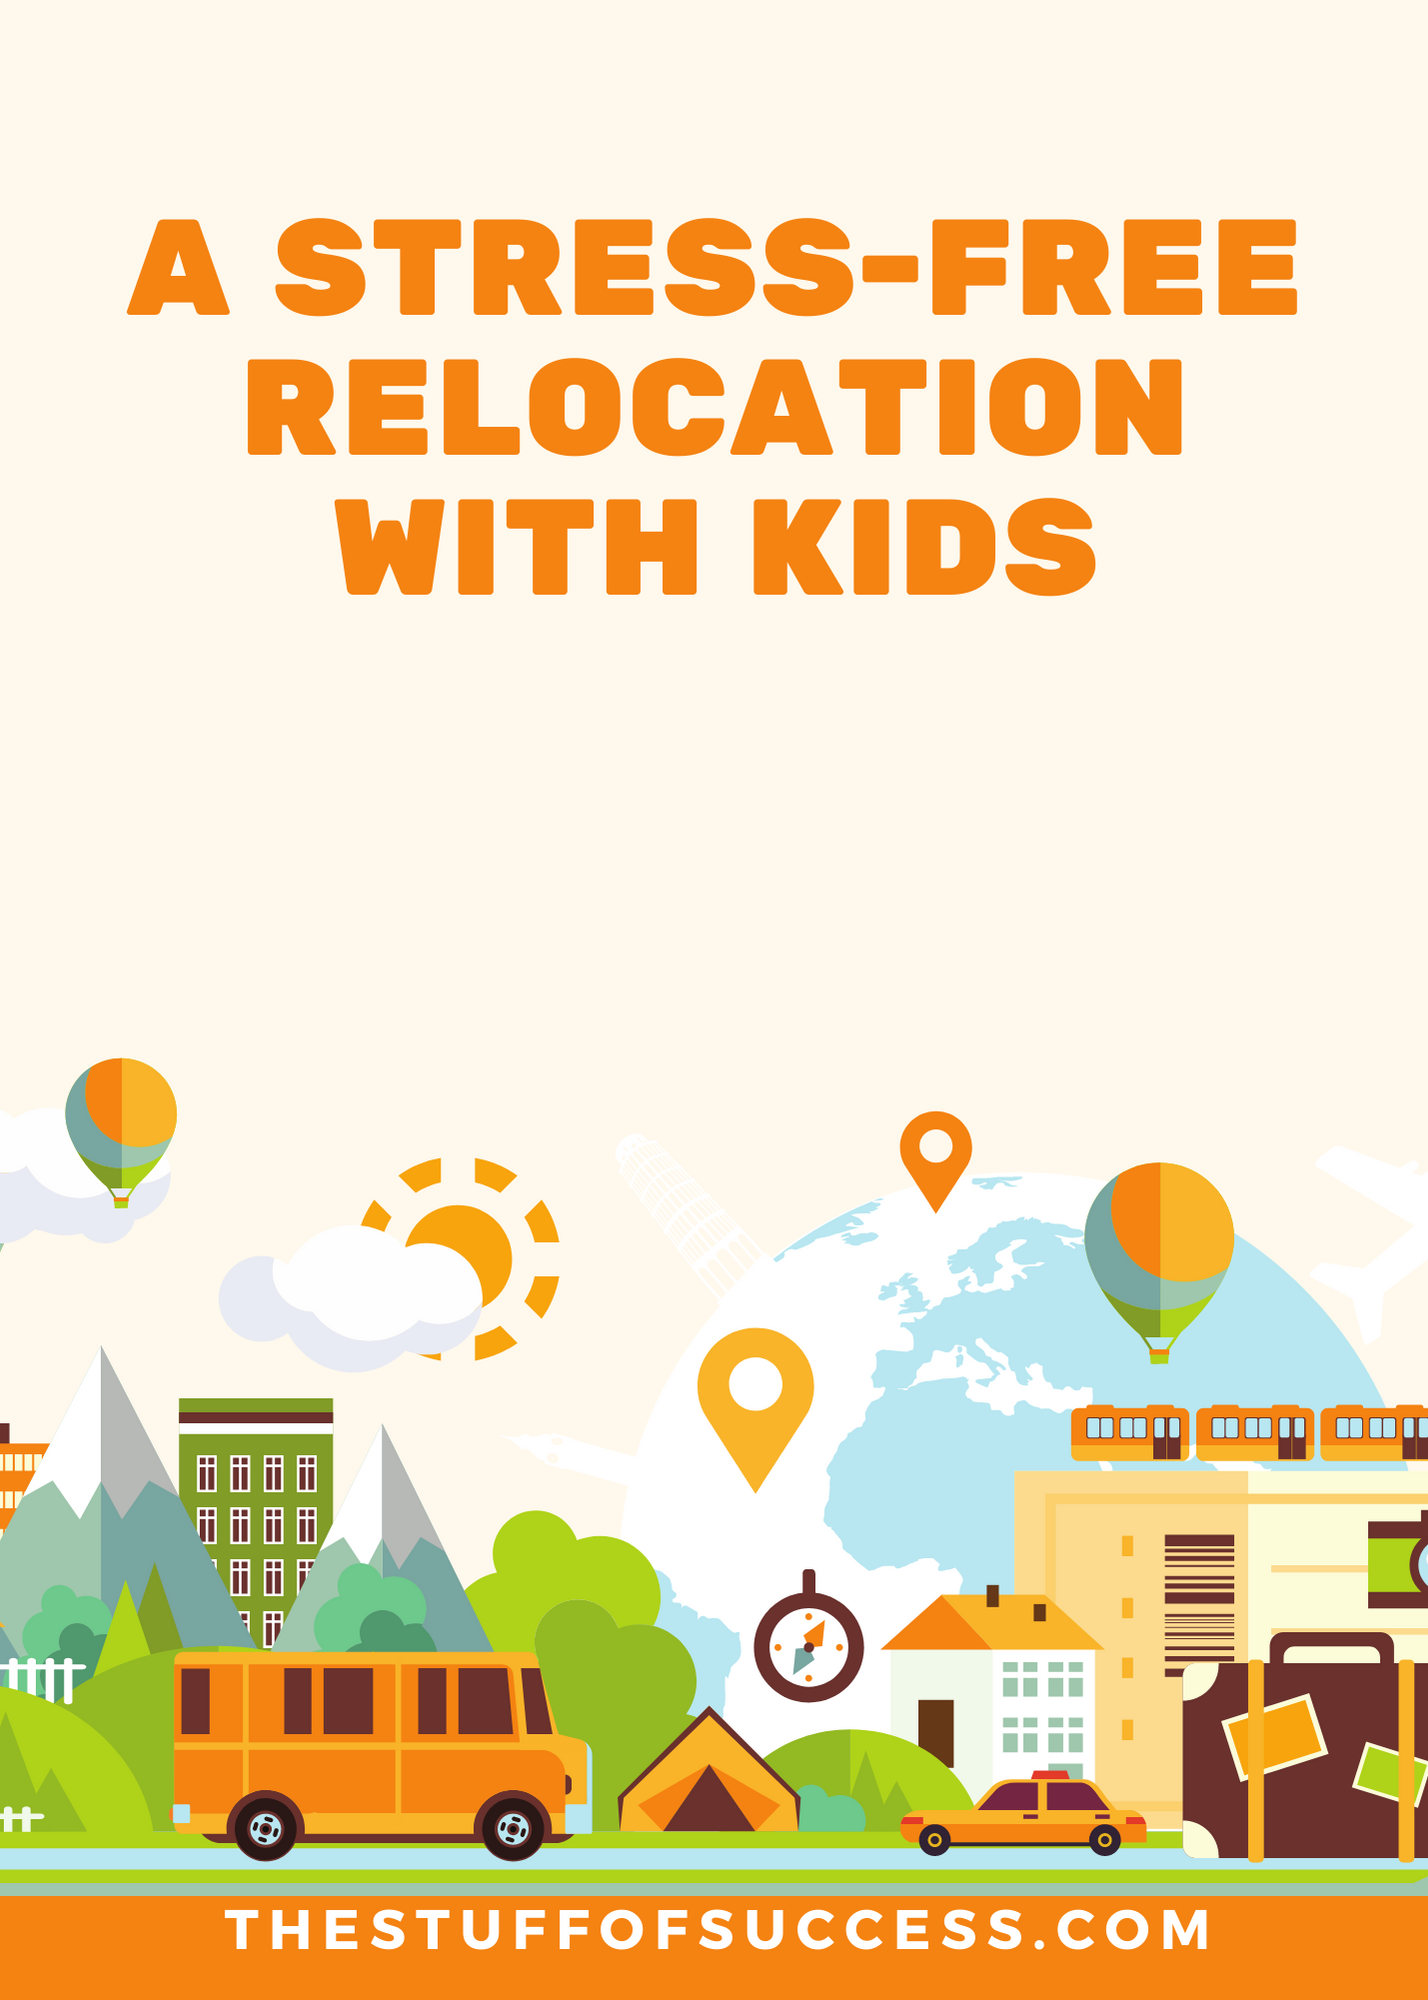 A Stress-Free Relocation with Kids